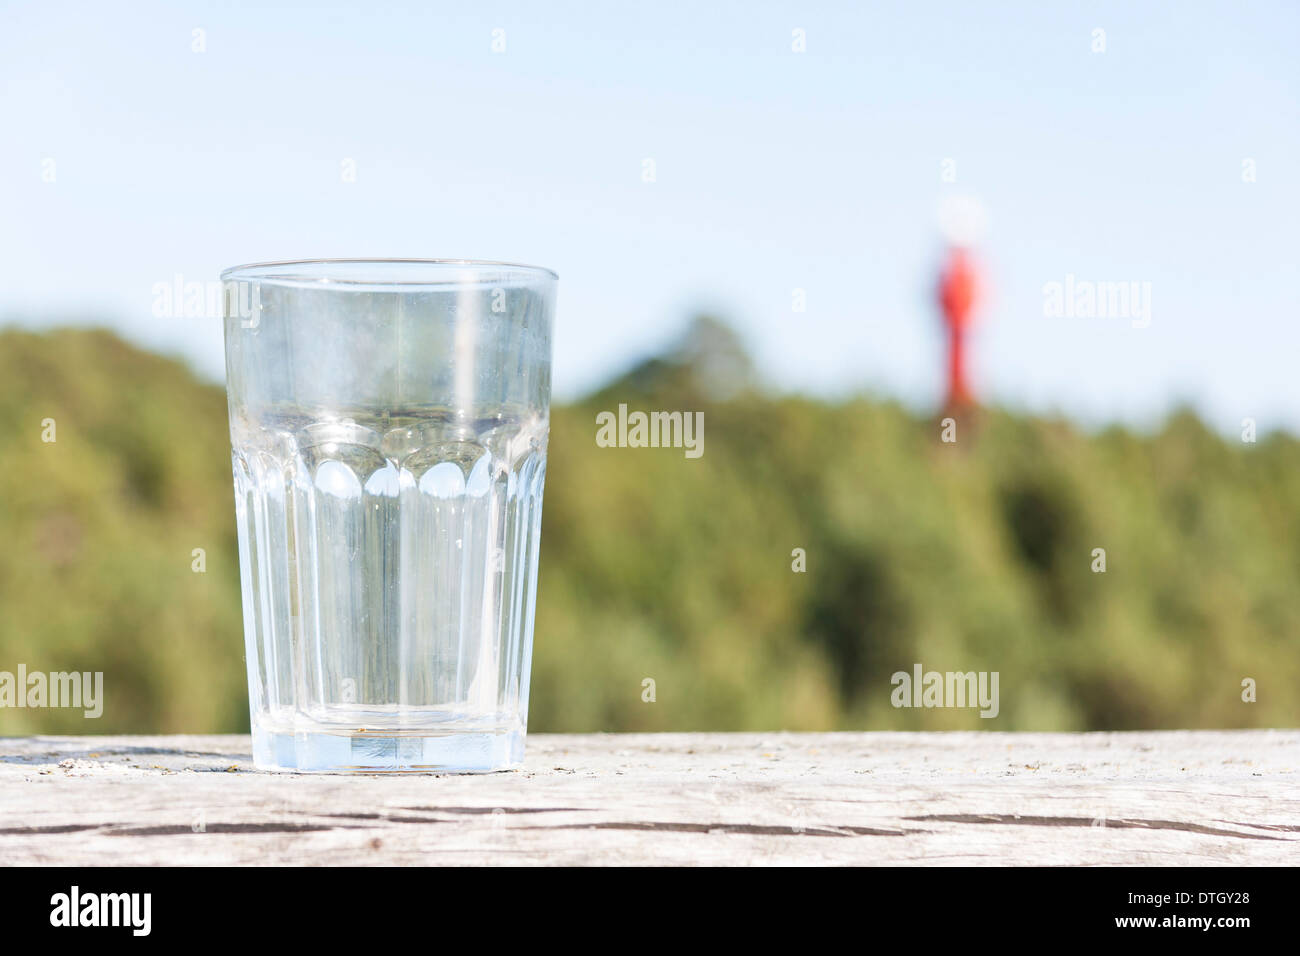 Drinking glass on table, green forest in background Stock Photo